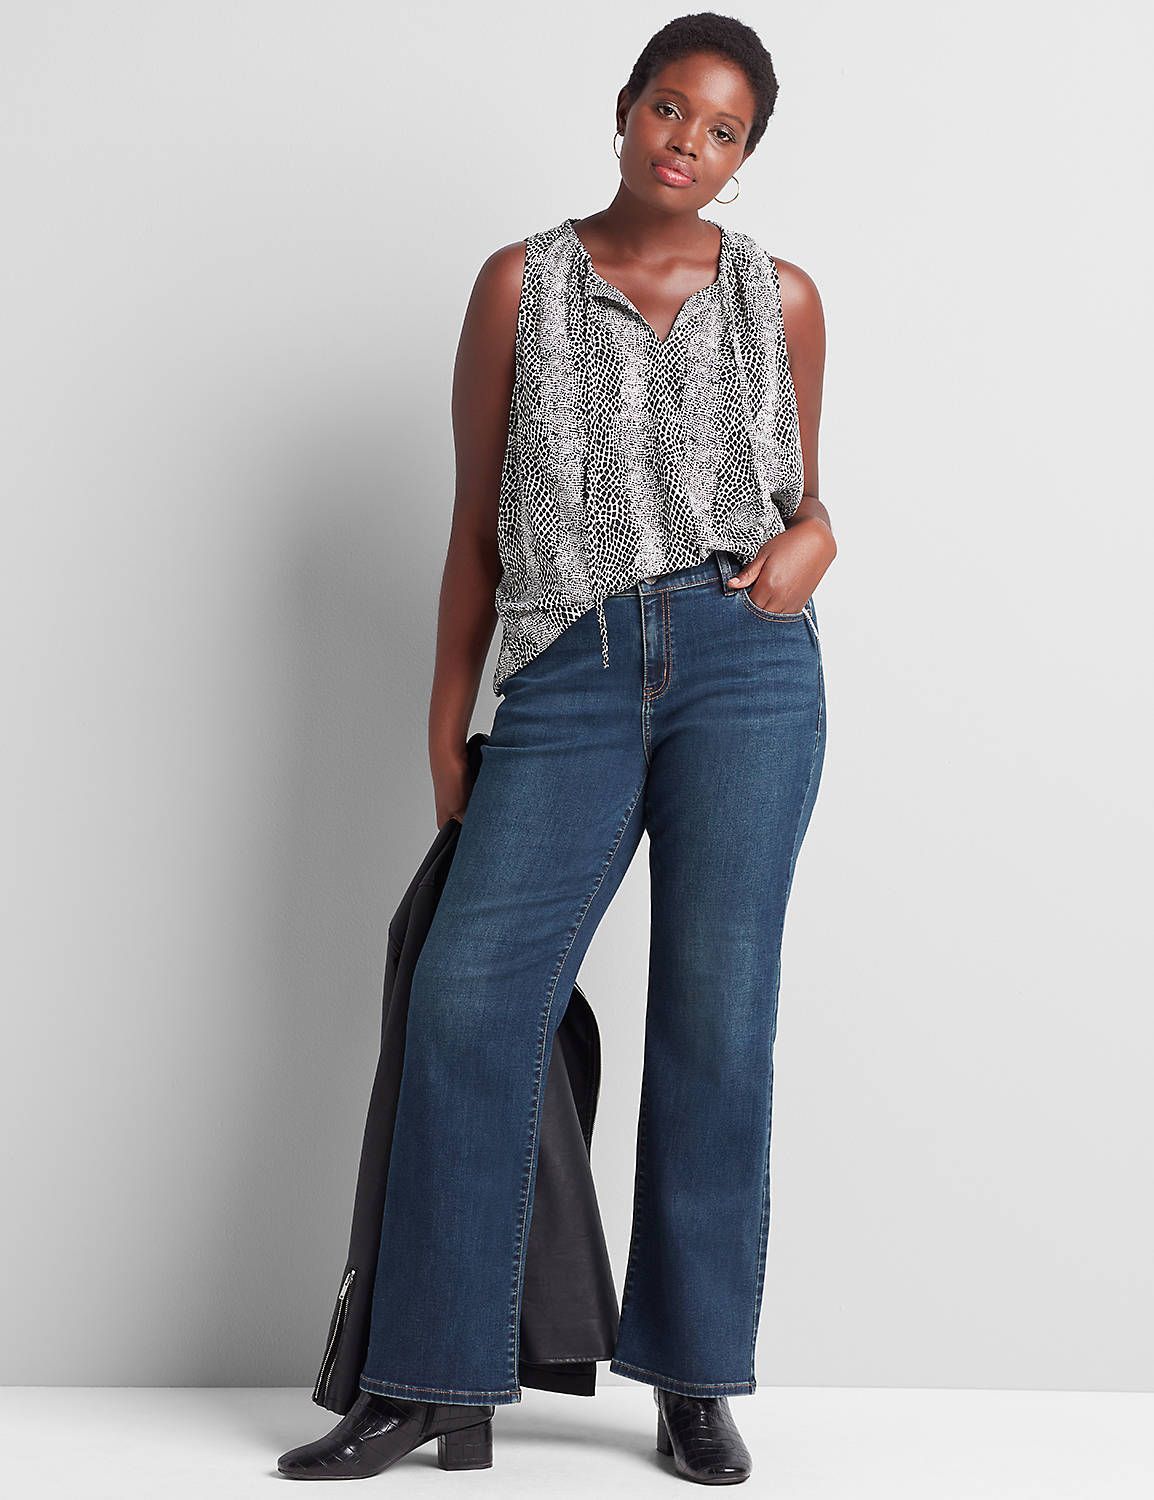 14 Plus-Size Jeans That Fit and Flatter